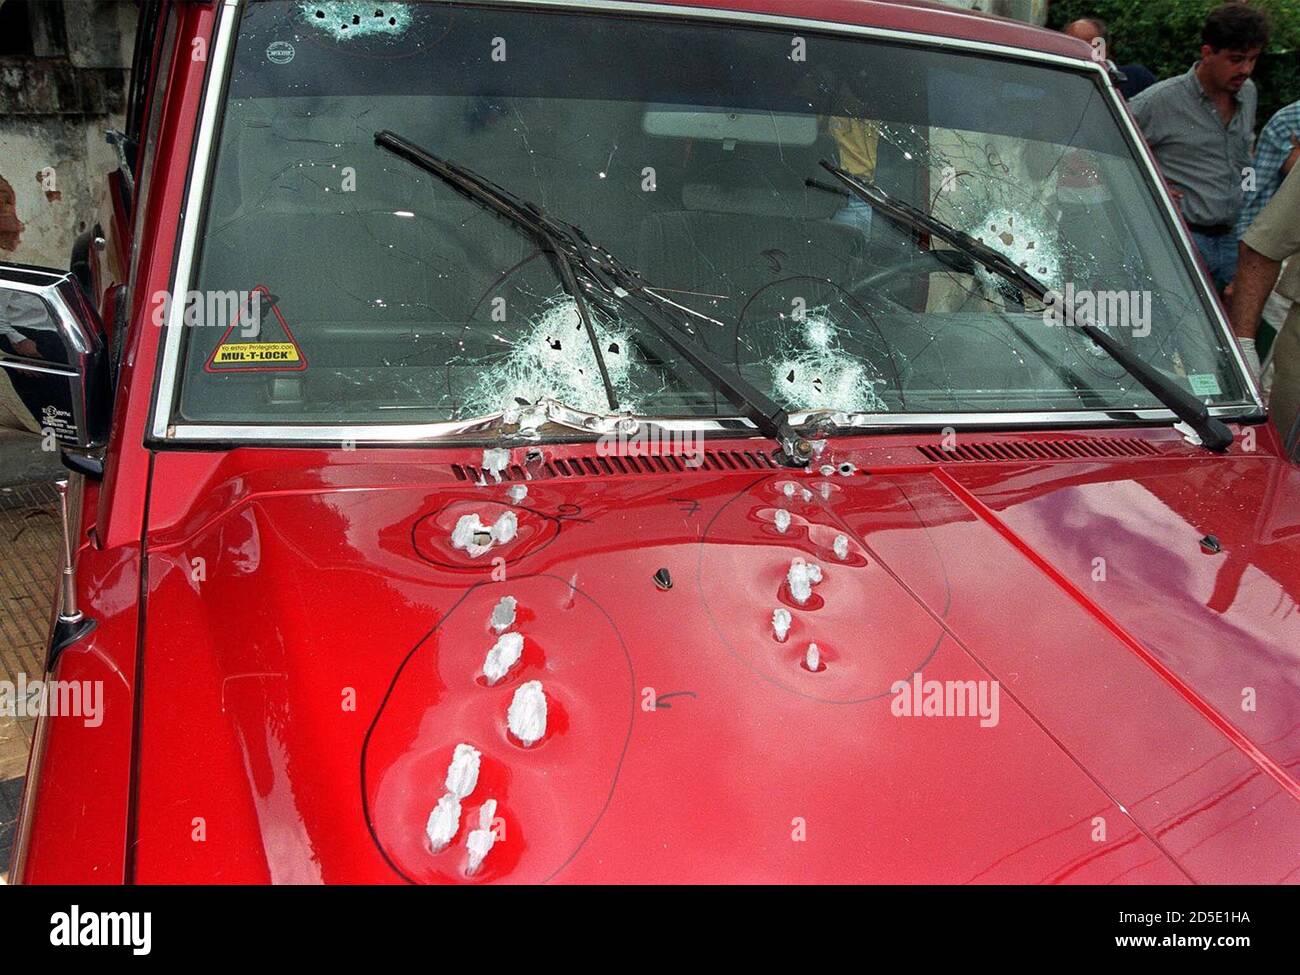 The bullet-ridden vehicle of Paraguayan Vice President Luis Argana remains  at the scene in the center of Asuncion where he was attacked by  unidentified gunmen early March 23. Argana was pronounced dead